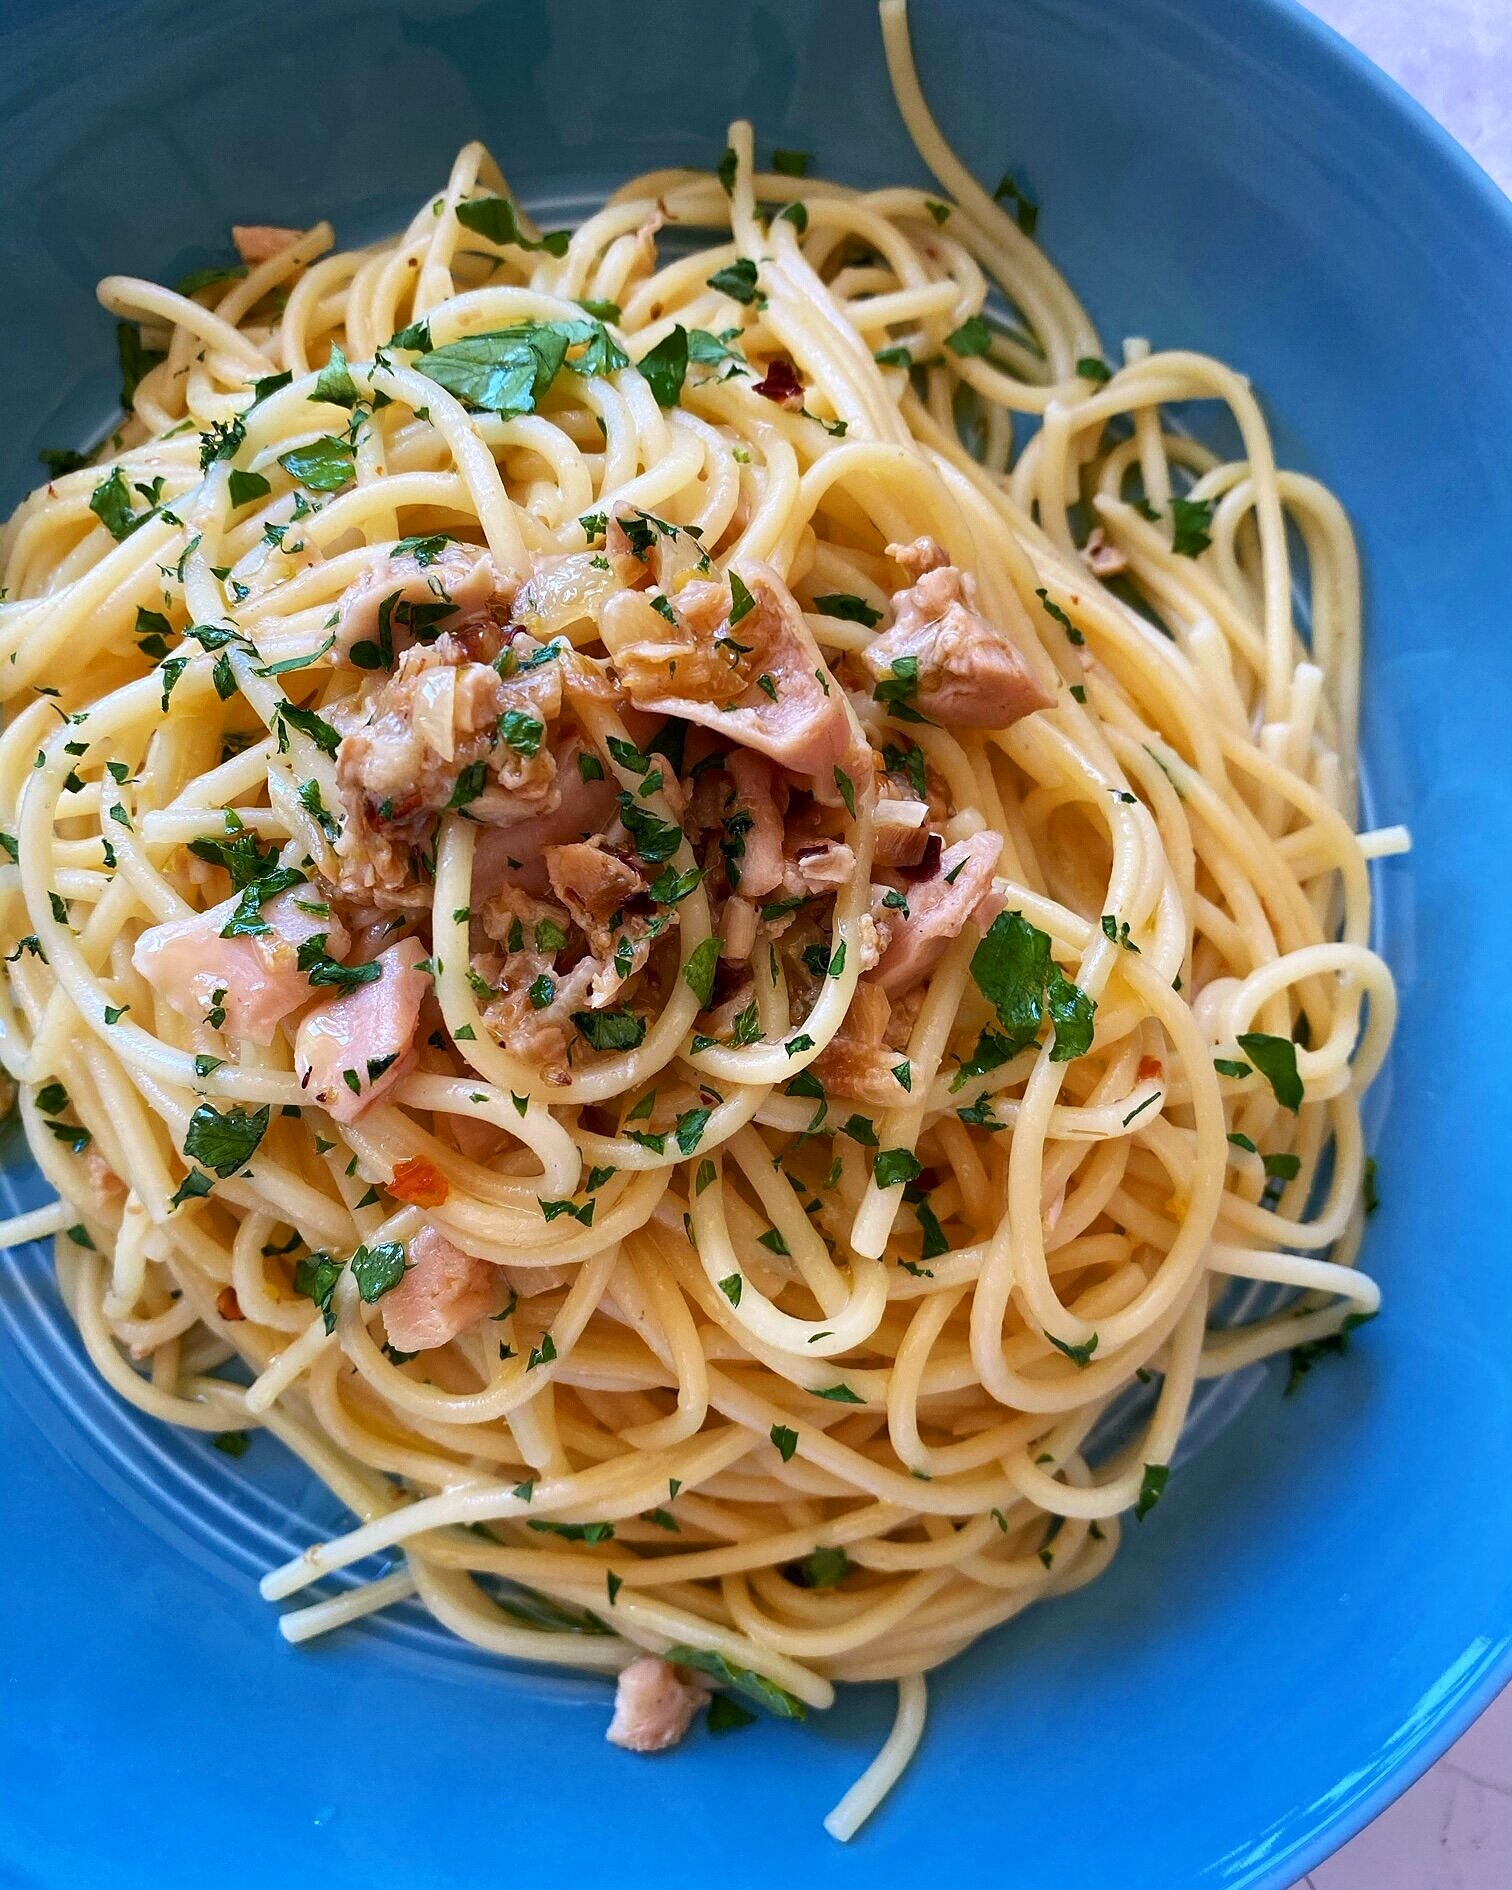 Pantry+Pasta-+Canned+Clams+with+White+Wine+Sauce+Spaghetti.jpg